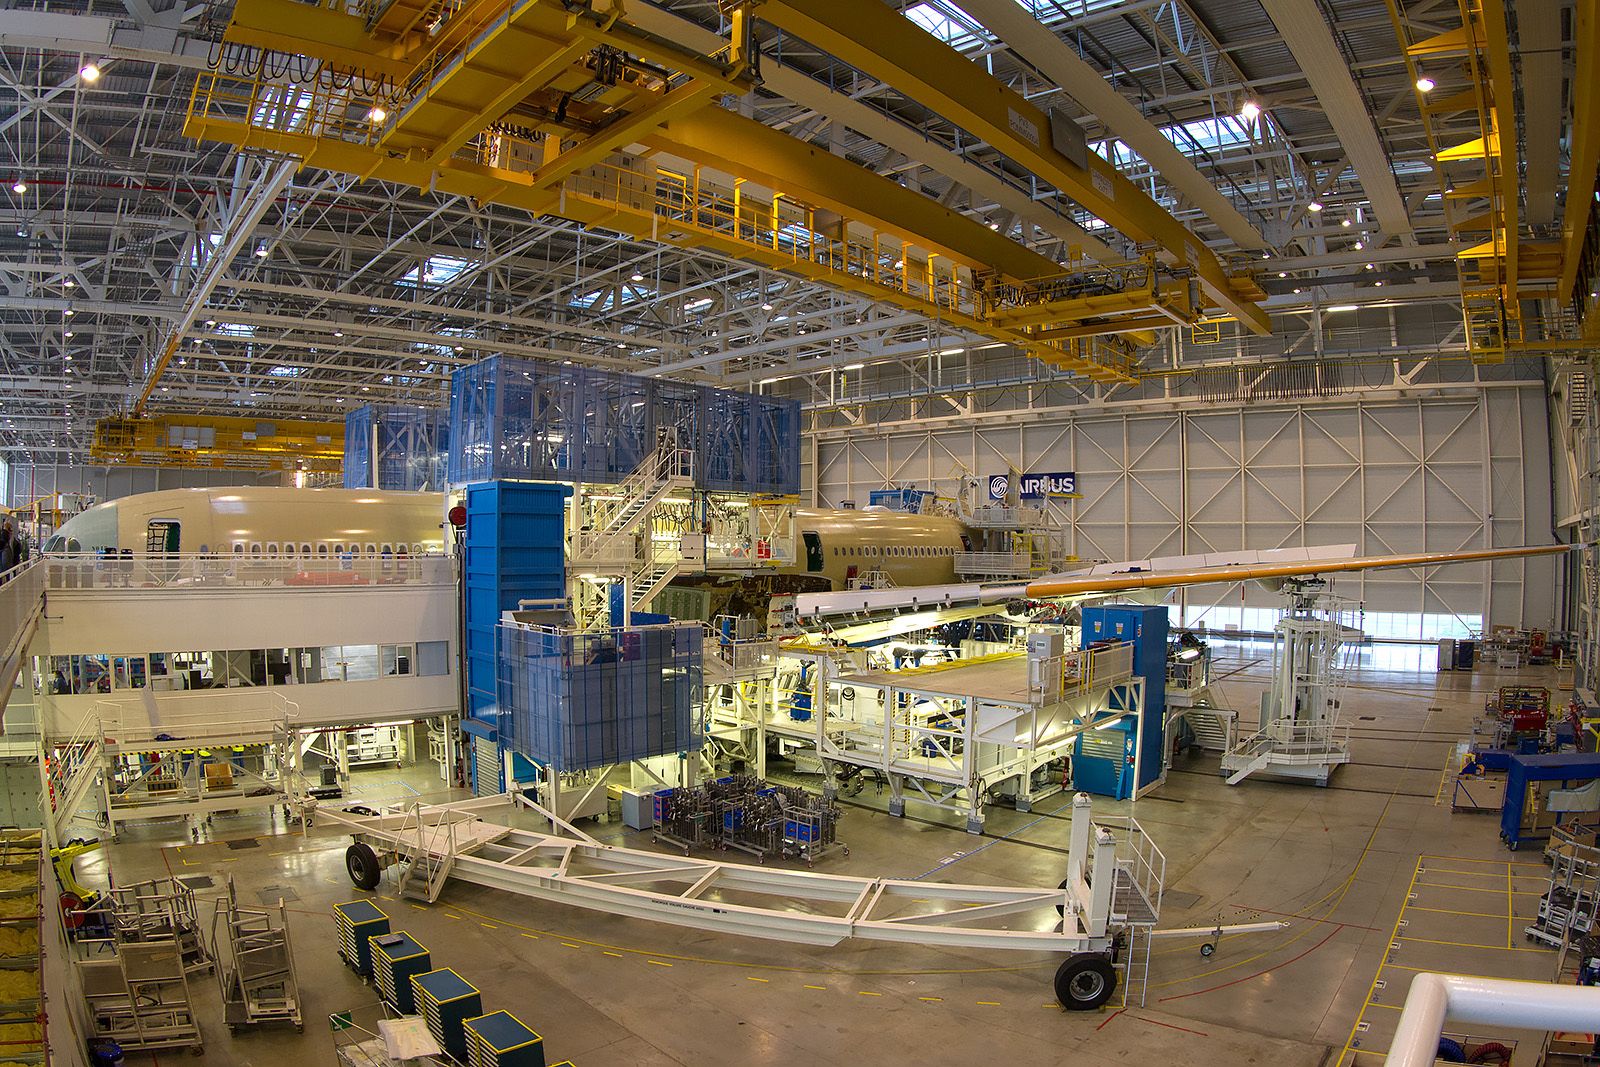 An Airbs A350 being assembled in the Toulouse factory.